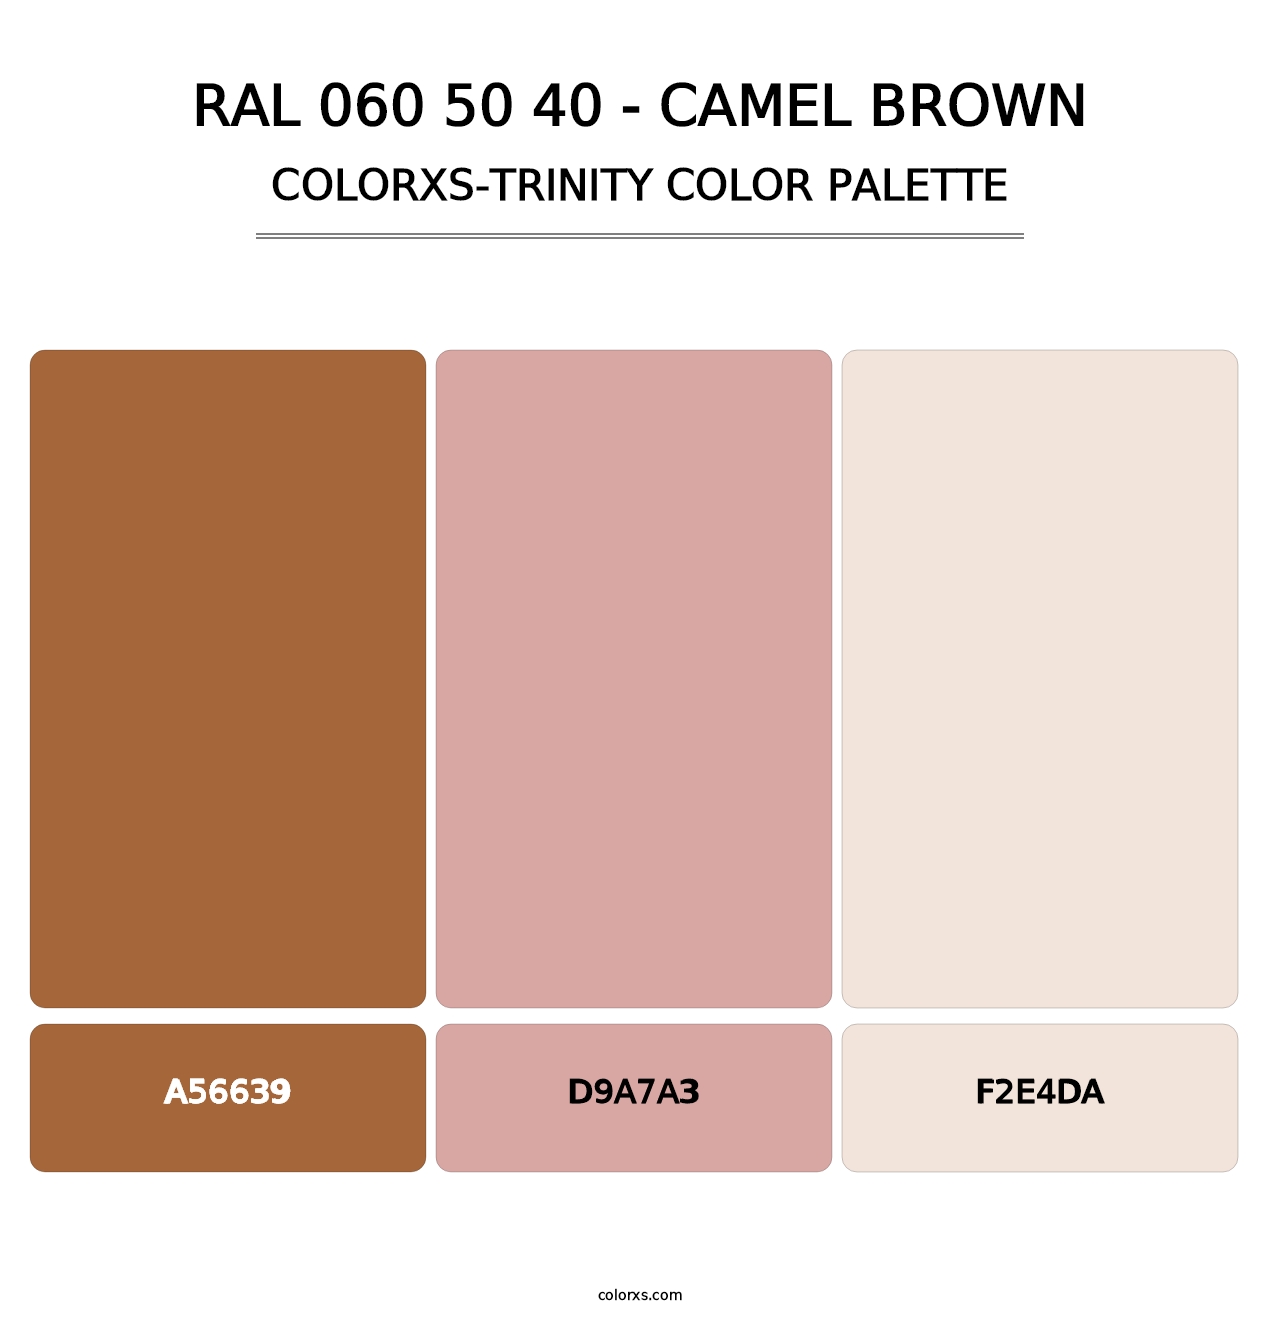 RAL 060 50 40 - Camel Brown - Colorxs Trinity Palette